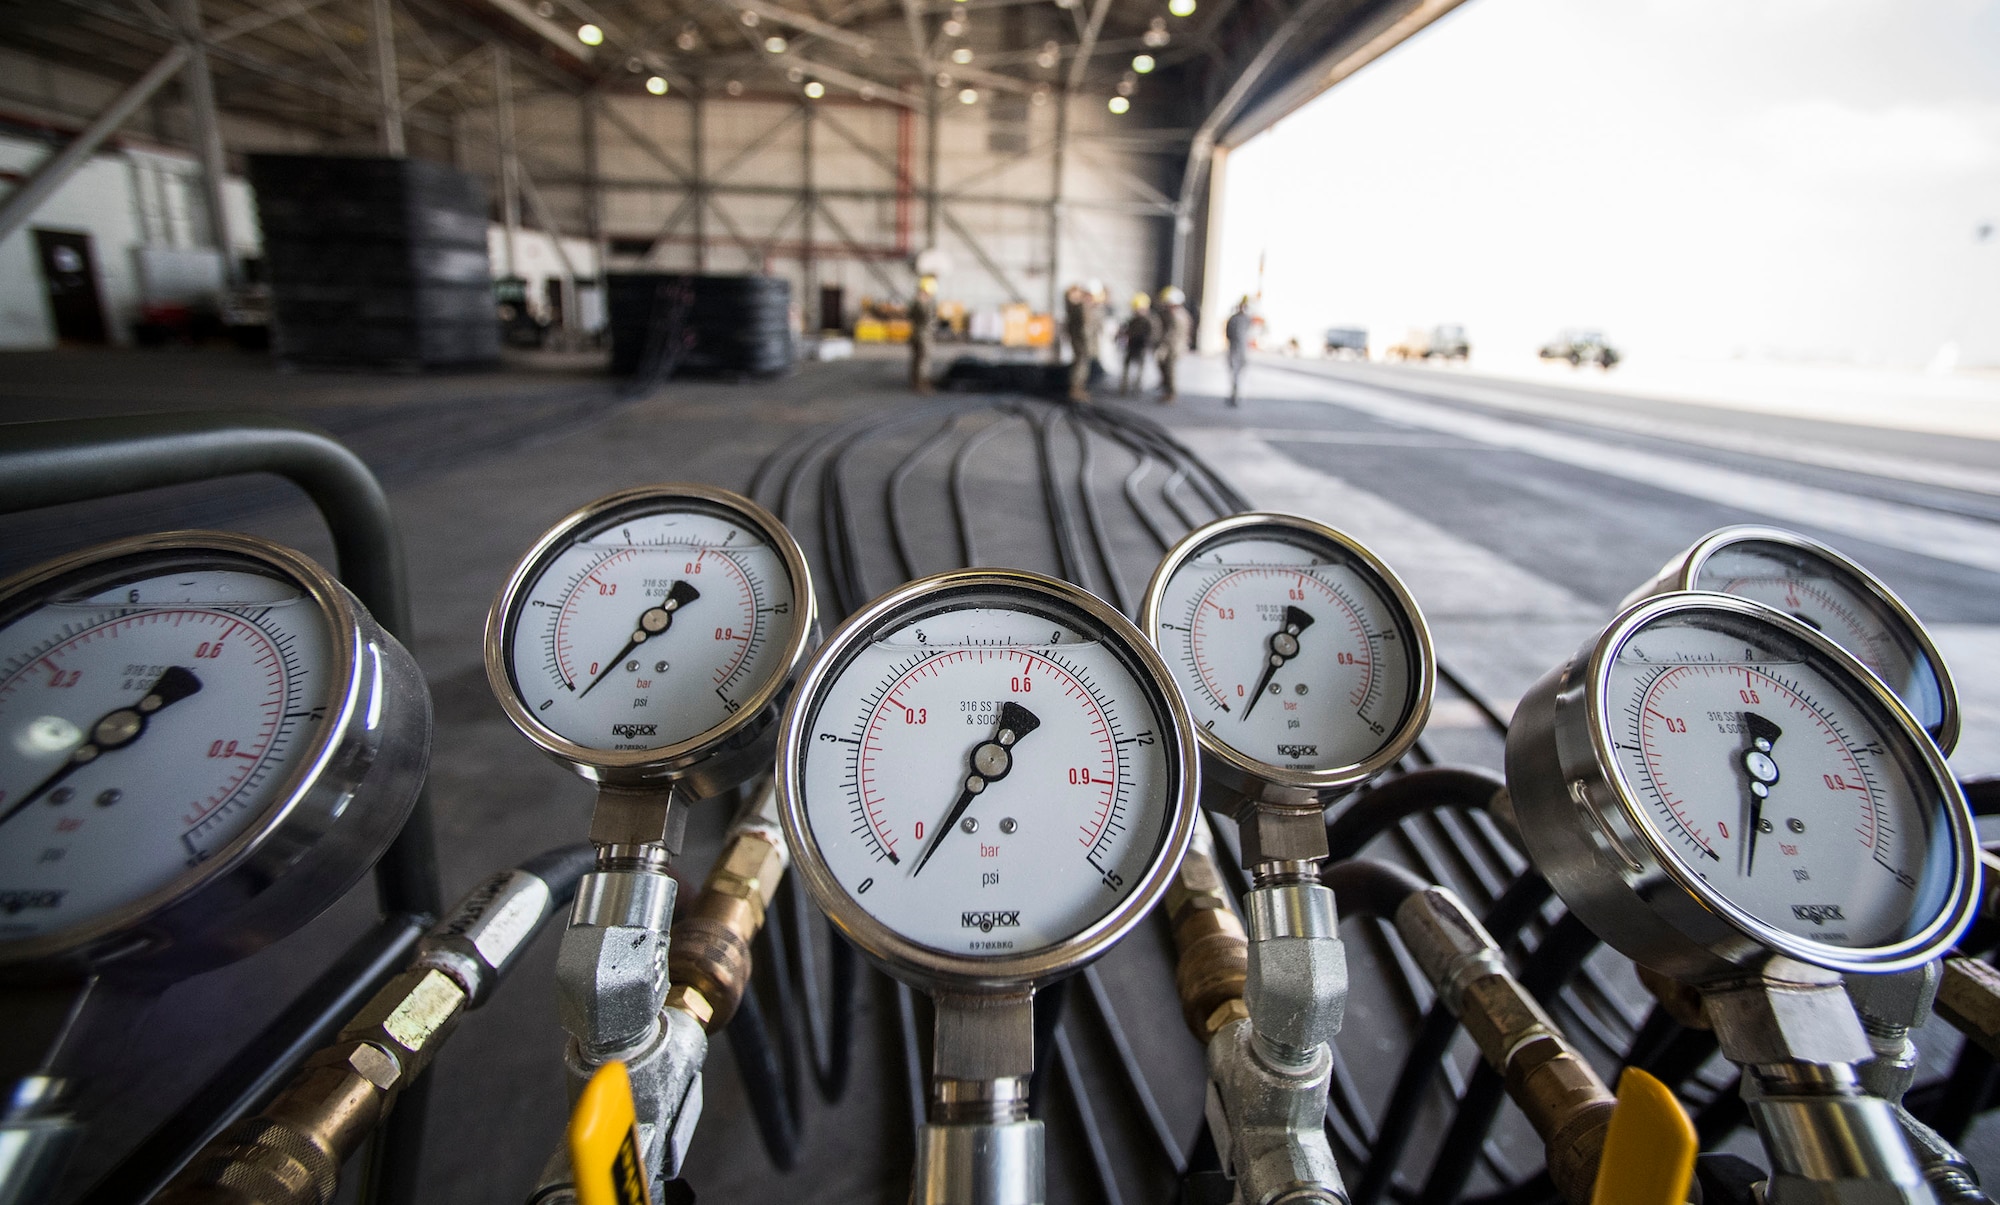 A pneumatic manifold is seen prior to a demonstration during an immersion tour Sept. 5, 2019, at Incirlik Air Base, Turkey. The manifold control console is used to control and monitor inflation of the 15-and-26 ton airbags. (U.S. Air Force photo by Staff Sgt. Ceaira Tinsley)